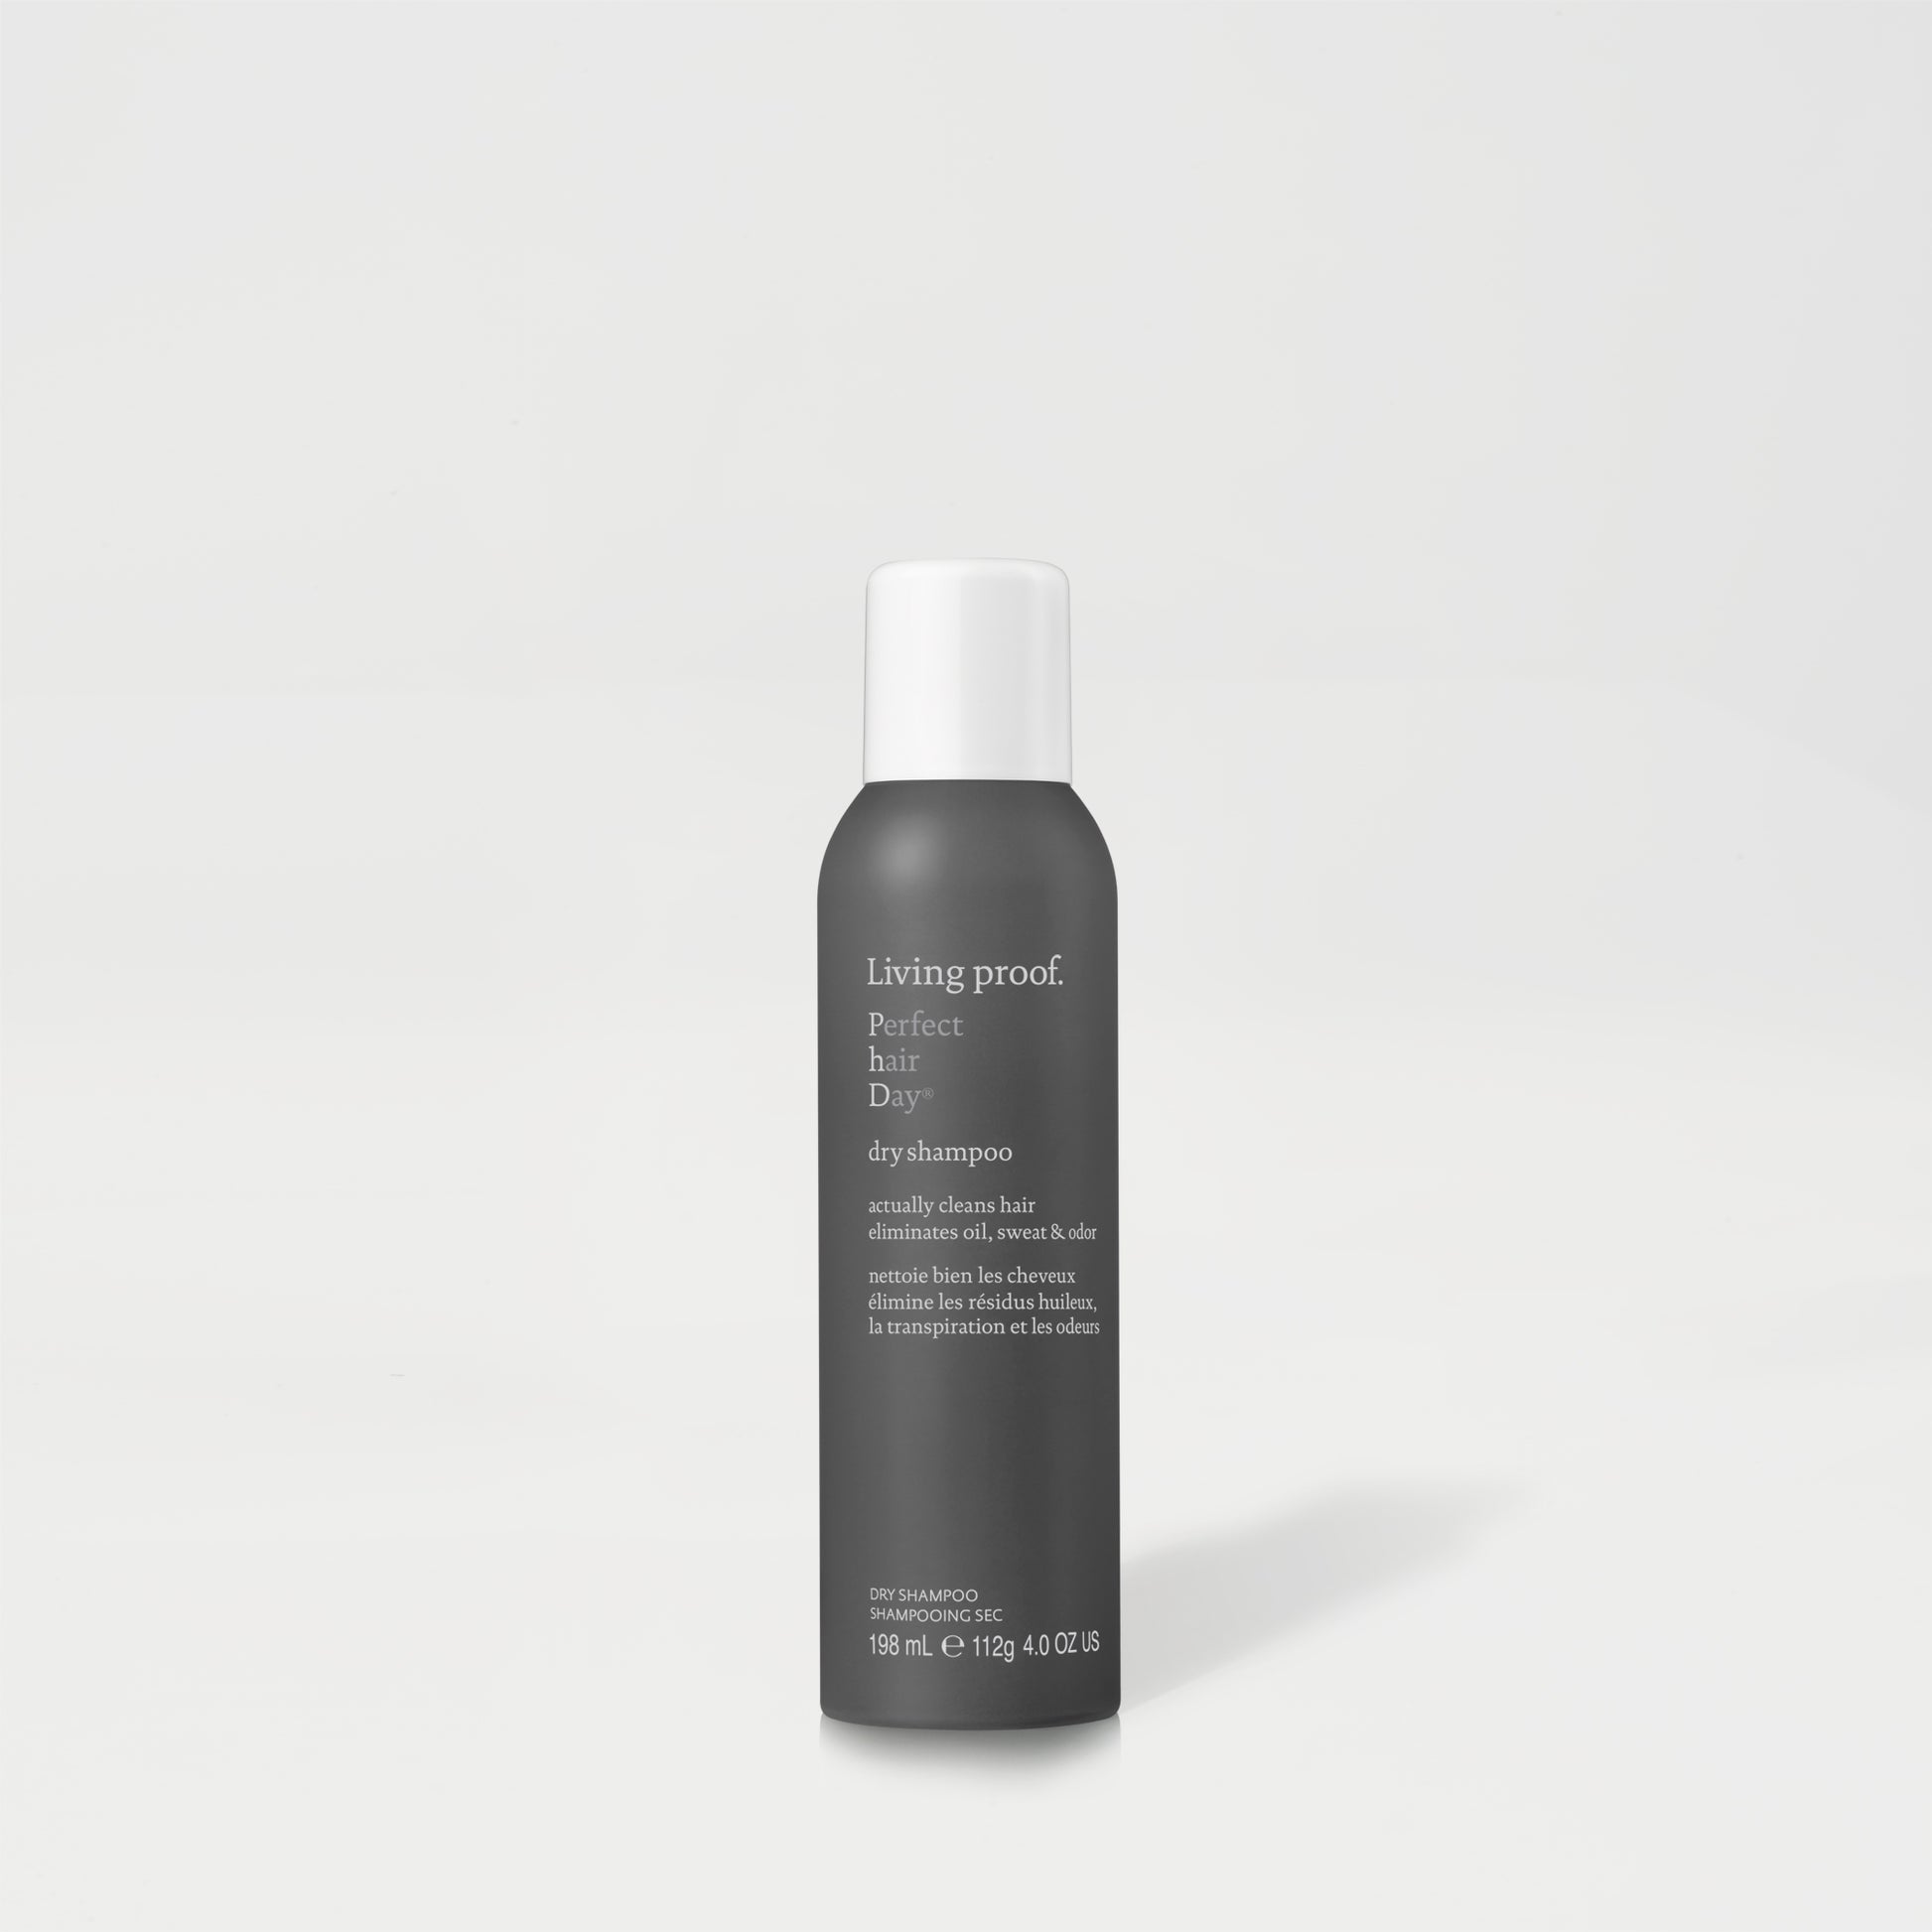 Living Proof Perfect Hair Day Dry Shampoo, Shop Online